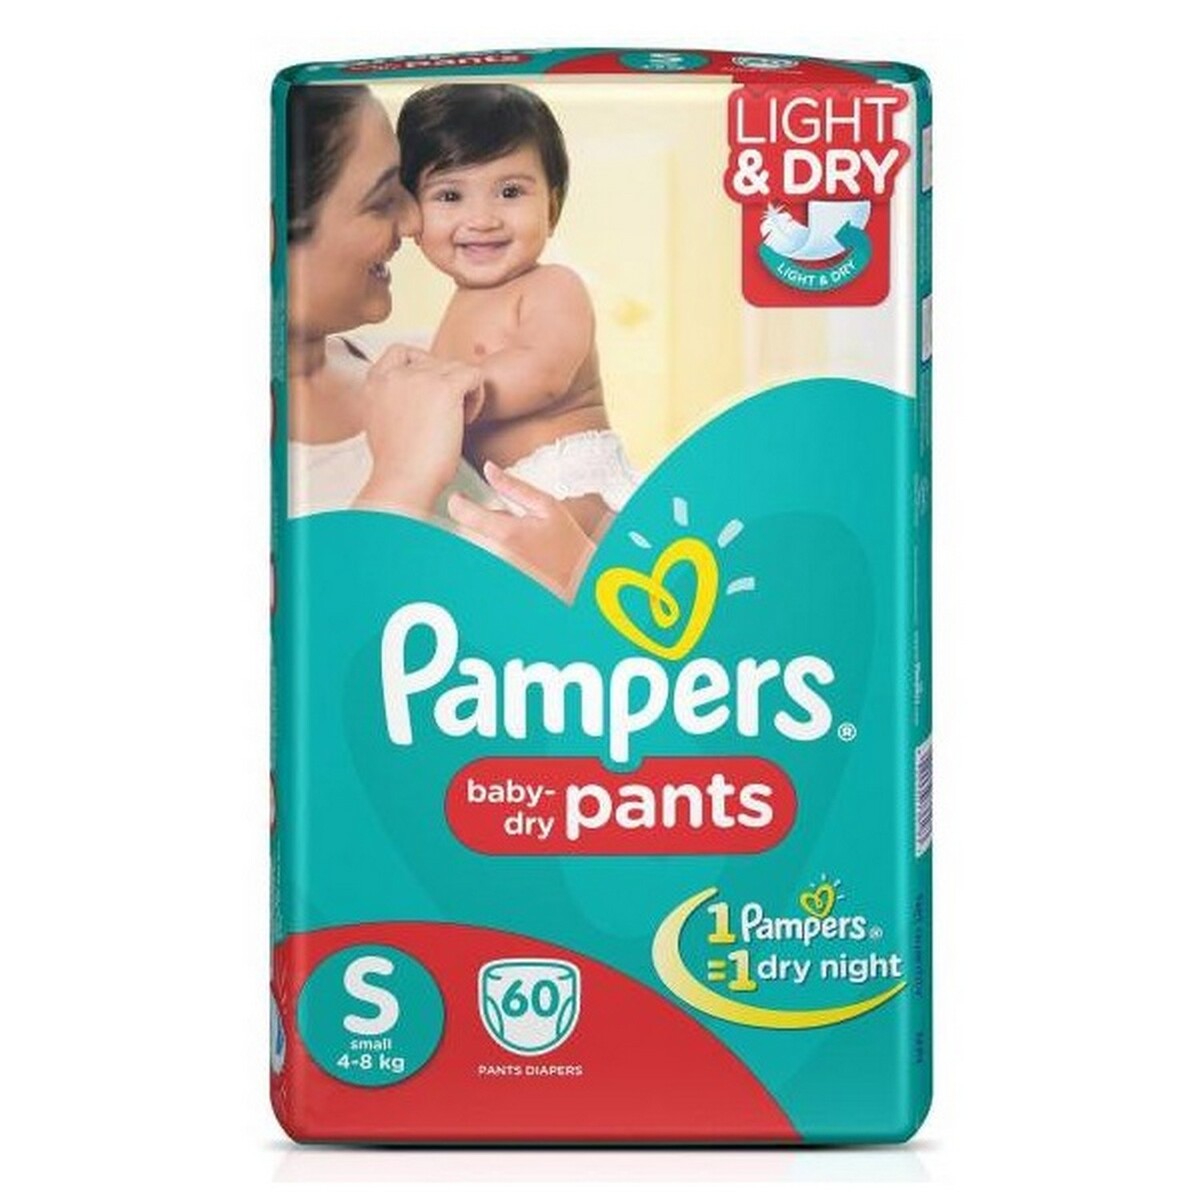 Pampers Pants Small Super Jumbo 52's